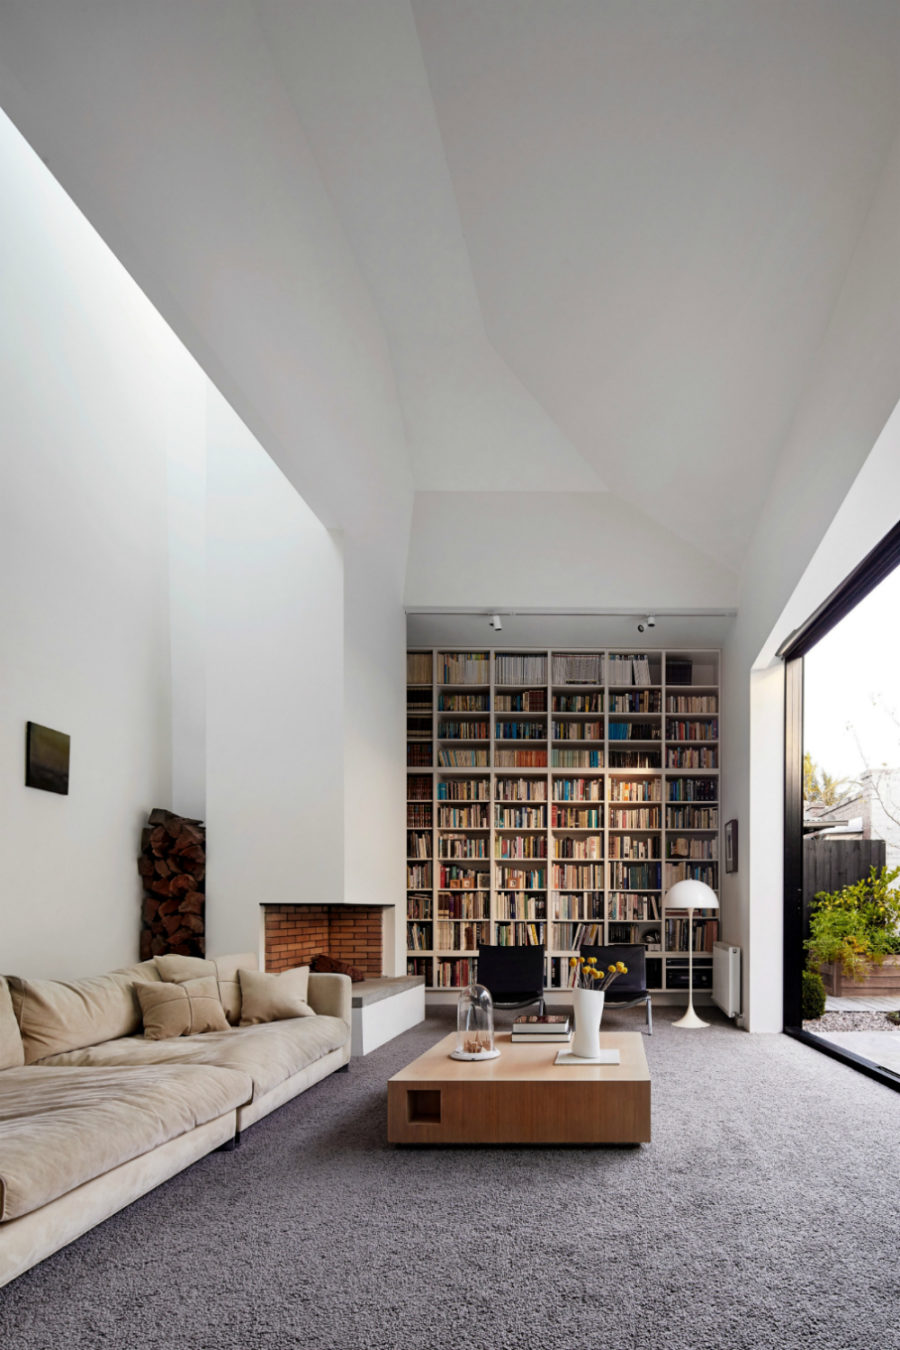 Modern Home Library Ideas for Bookworms and Butterflies